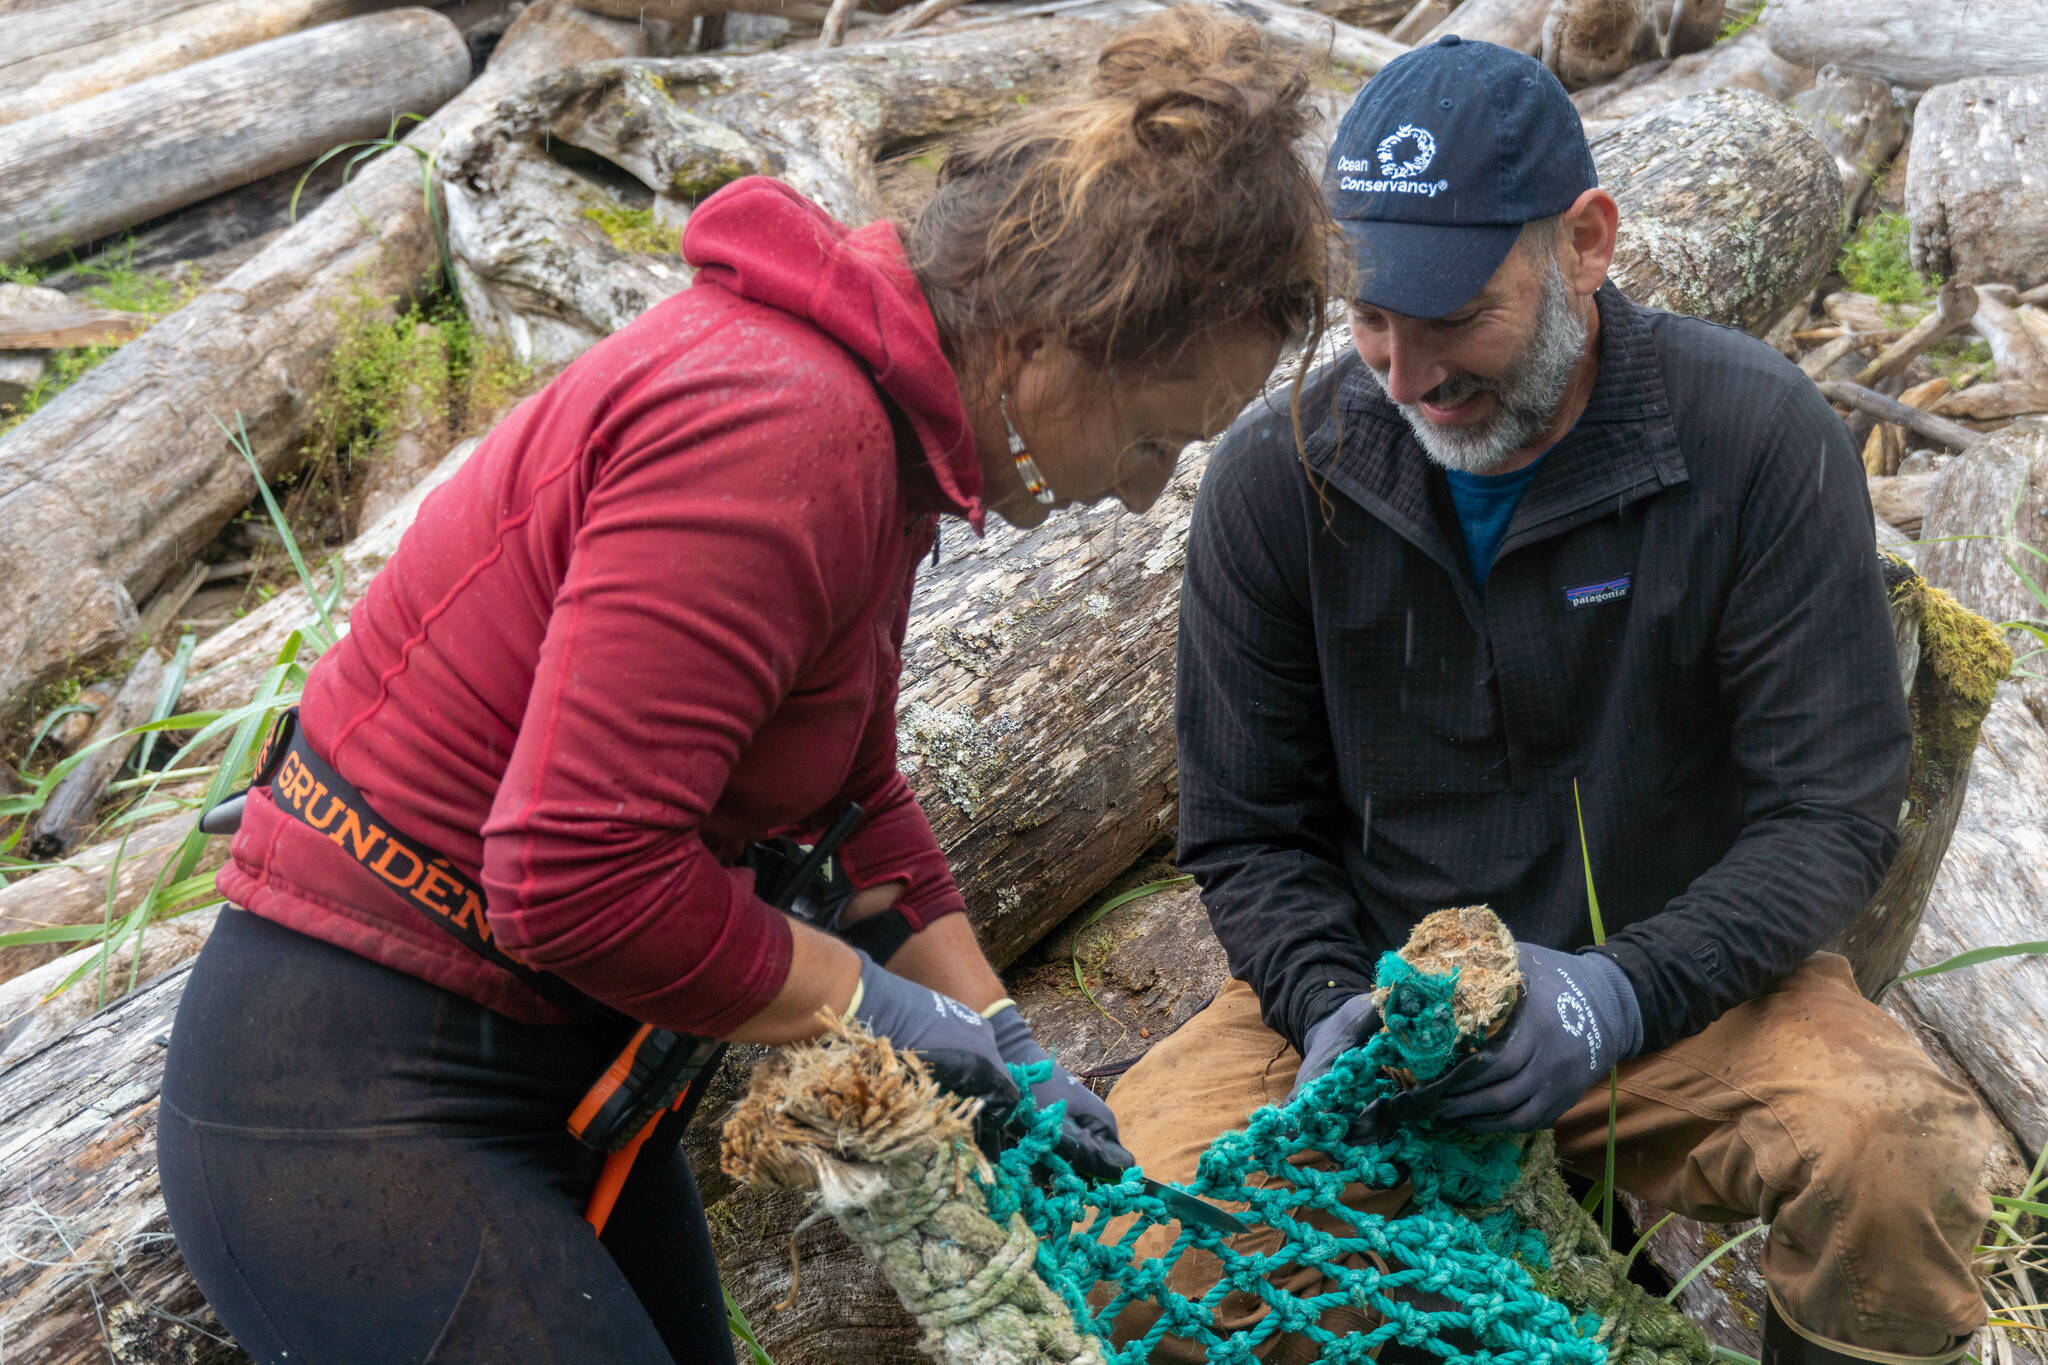 Zofia Danielson, marine debris coordinator with Sitka Sound Science Center, works alongside Michael LaVine, senior director of Alaska programs with Ocean Conservancy, to portion up a large piece of trawl net to be carried back to the pickup site. (Ryan Morse / Sitka Conservation Society)